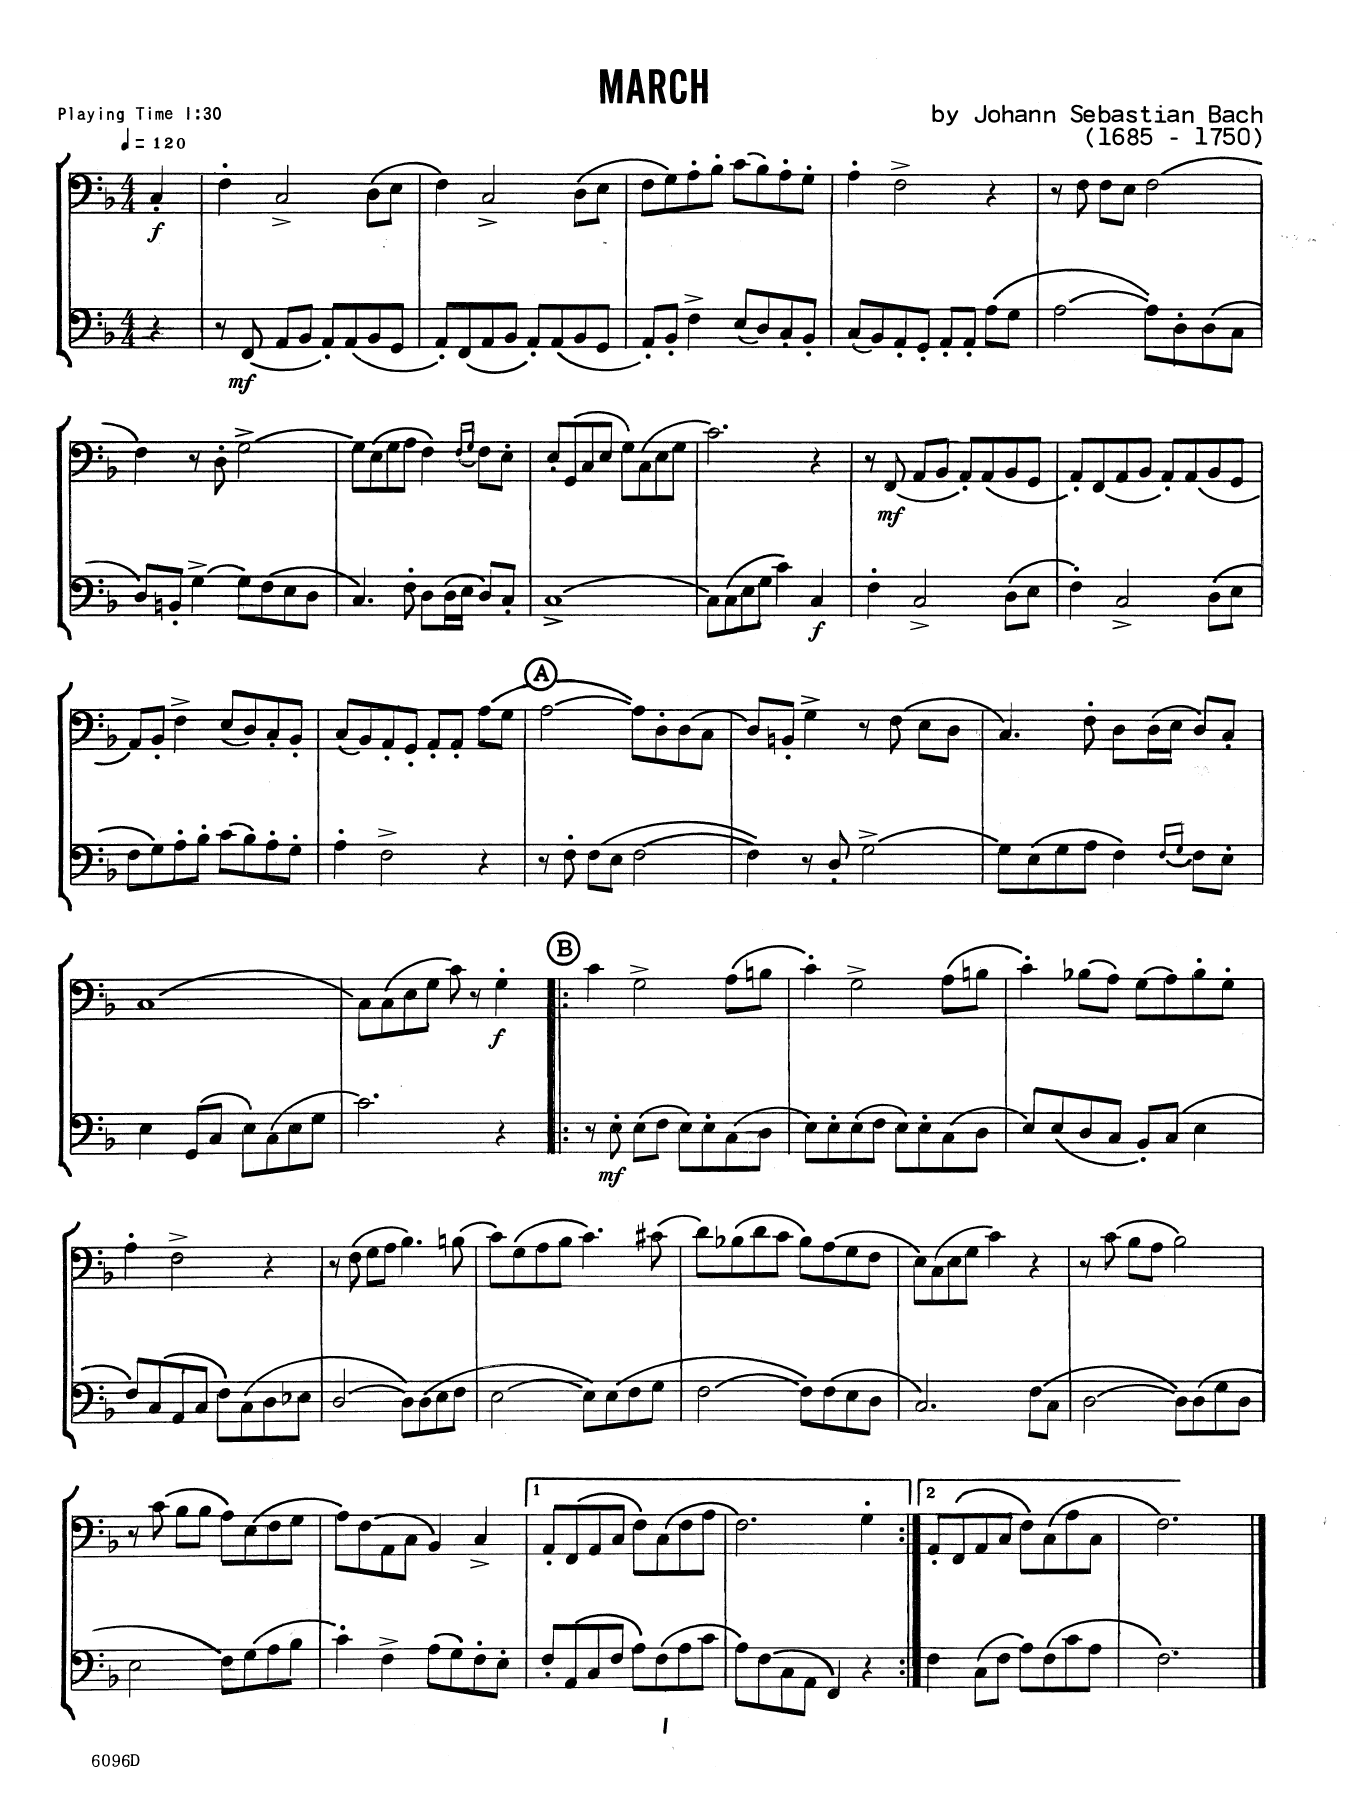 Download Paul M. Stouffer Six For Two Sheet Music